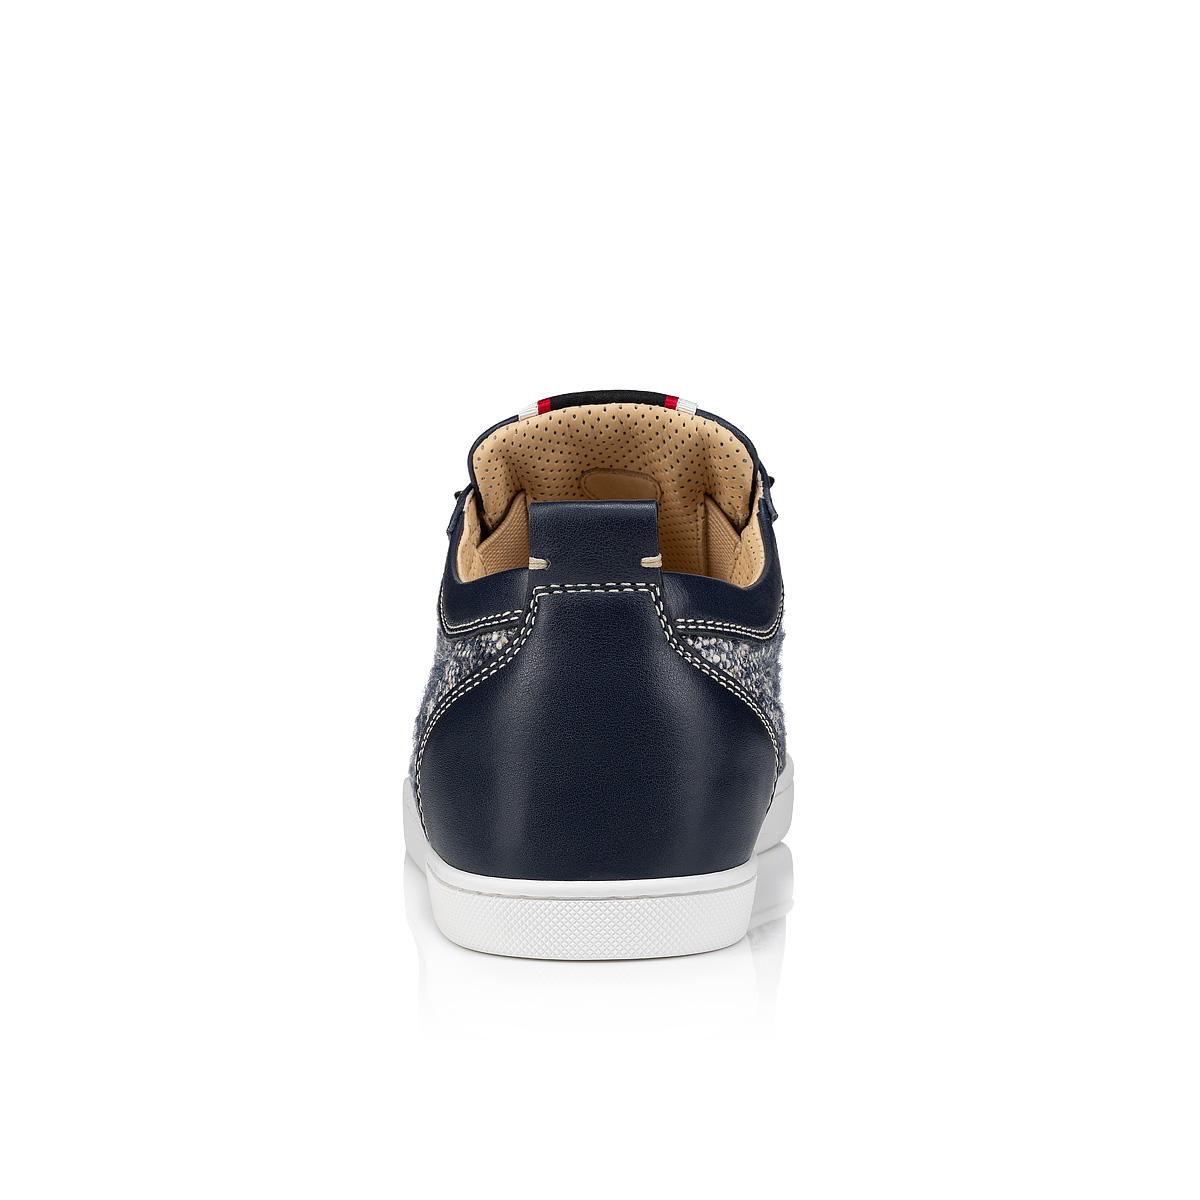 F.A.V Fique A Vontade - Sneakers - Wool and calf leather - Navy - Christian  Louboutin United States